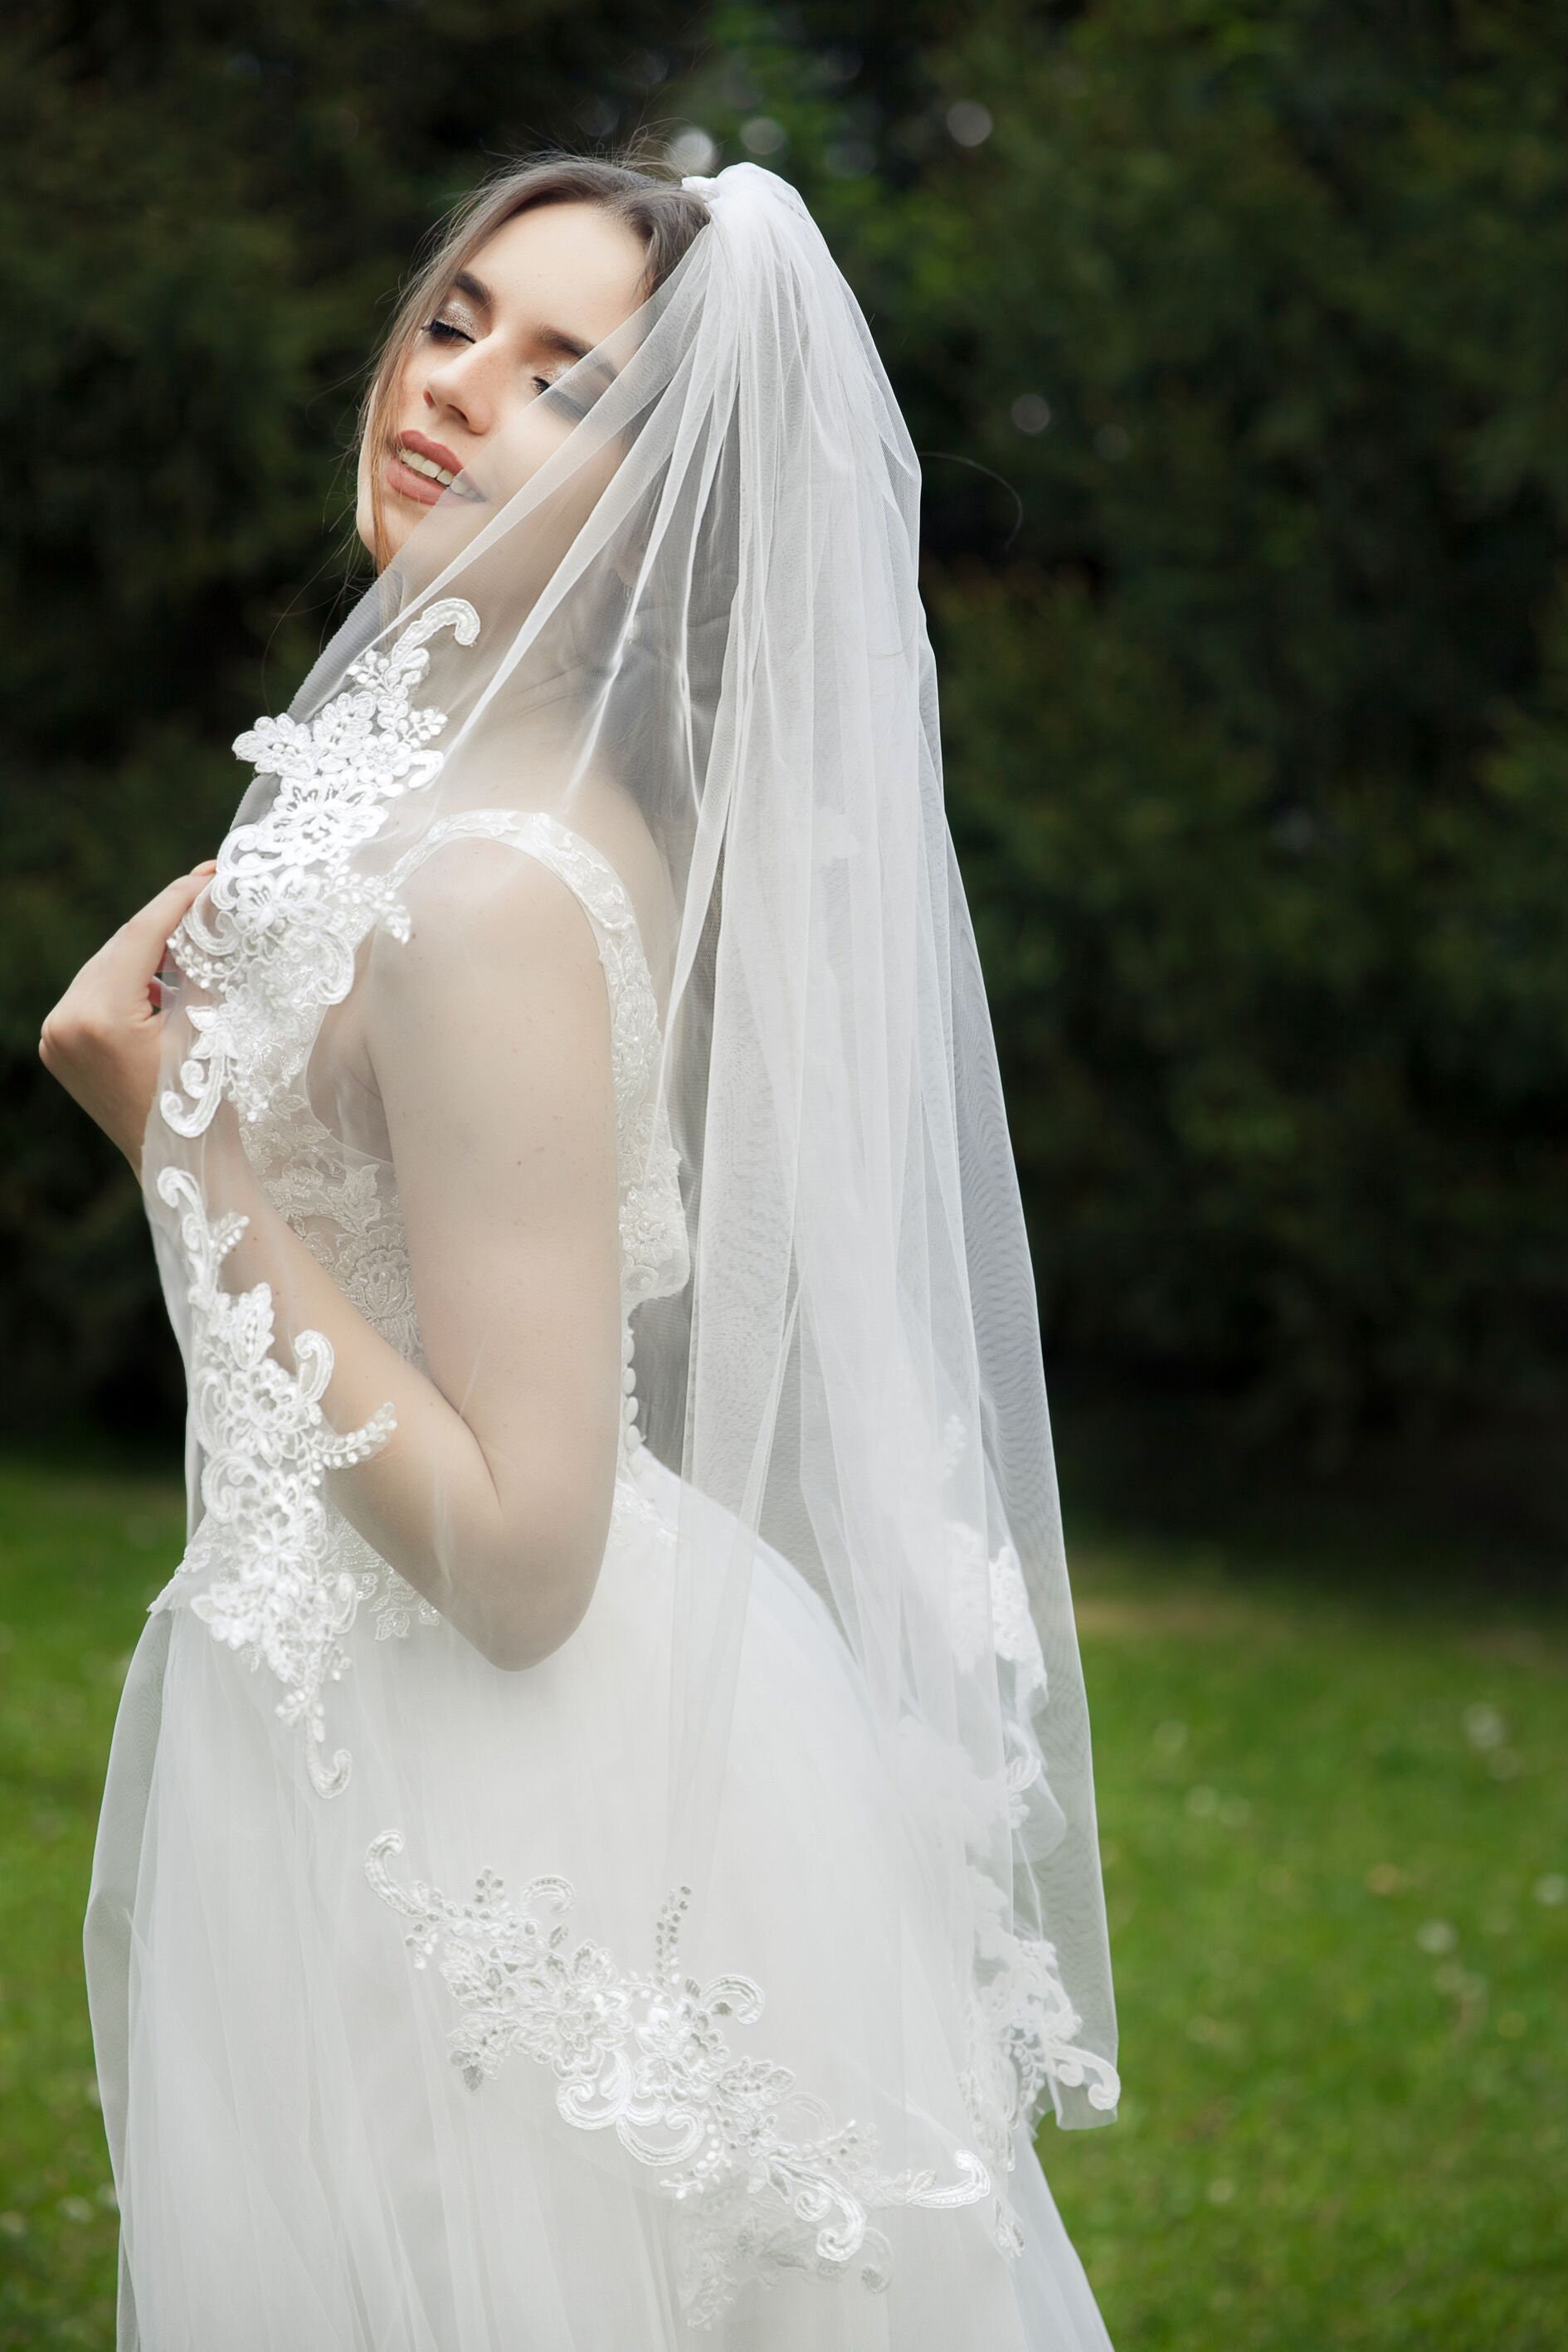 Two Tier Lace Edge Bridal Veil, 2 Layer Wedding Veil With Lace, Soft Tulle  Ivory Lace Veil, Beaded Lace White Bridal Veil, French Lace Veil 